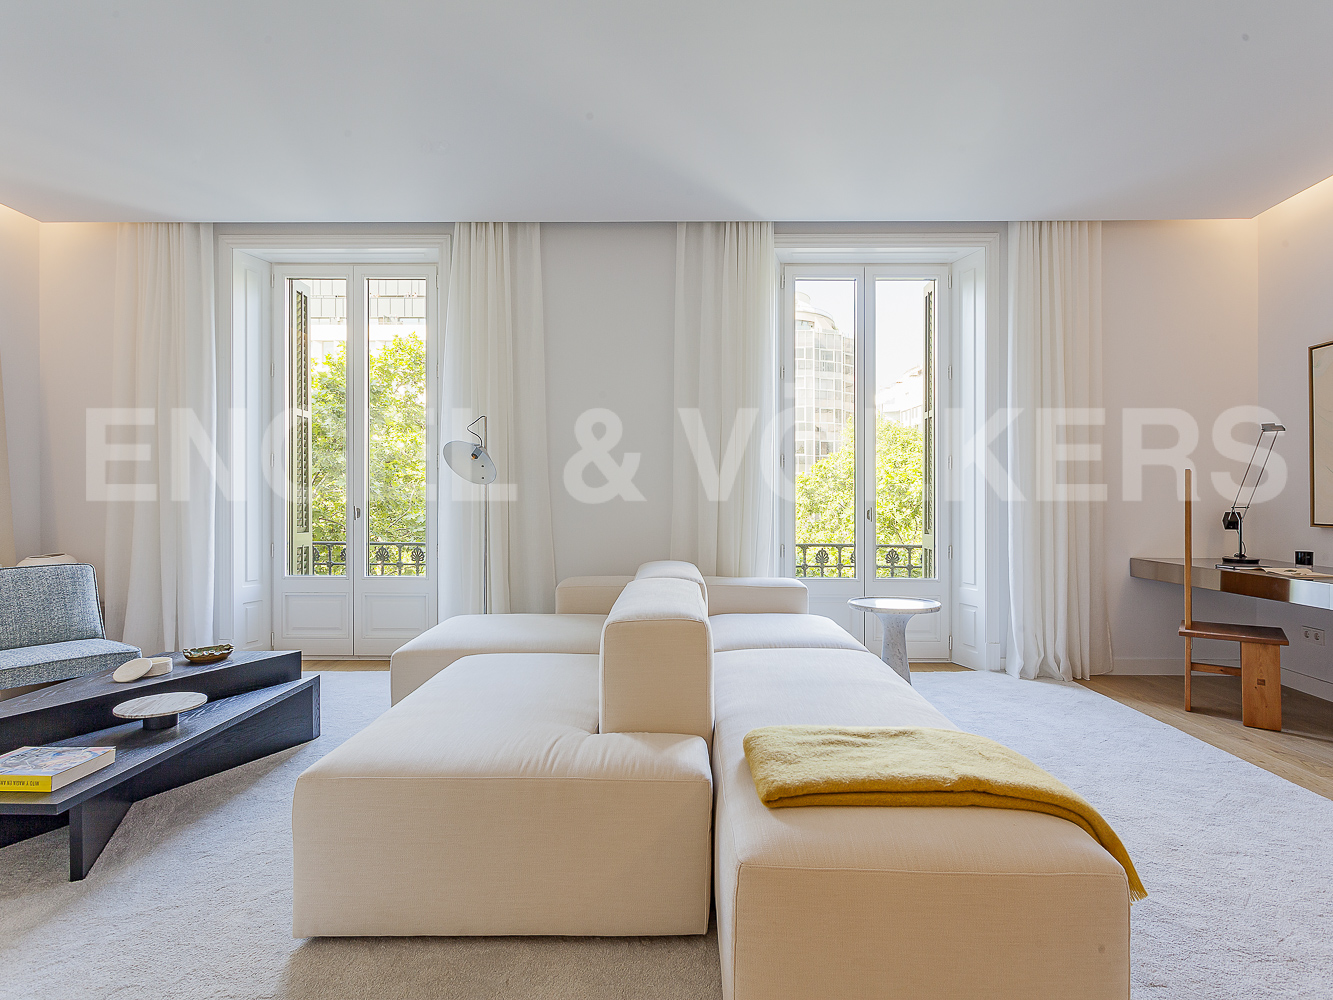 Flat in renovated building on Paseo de Gracia